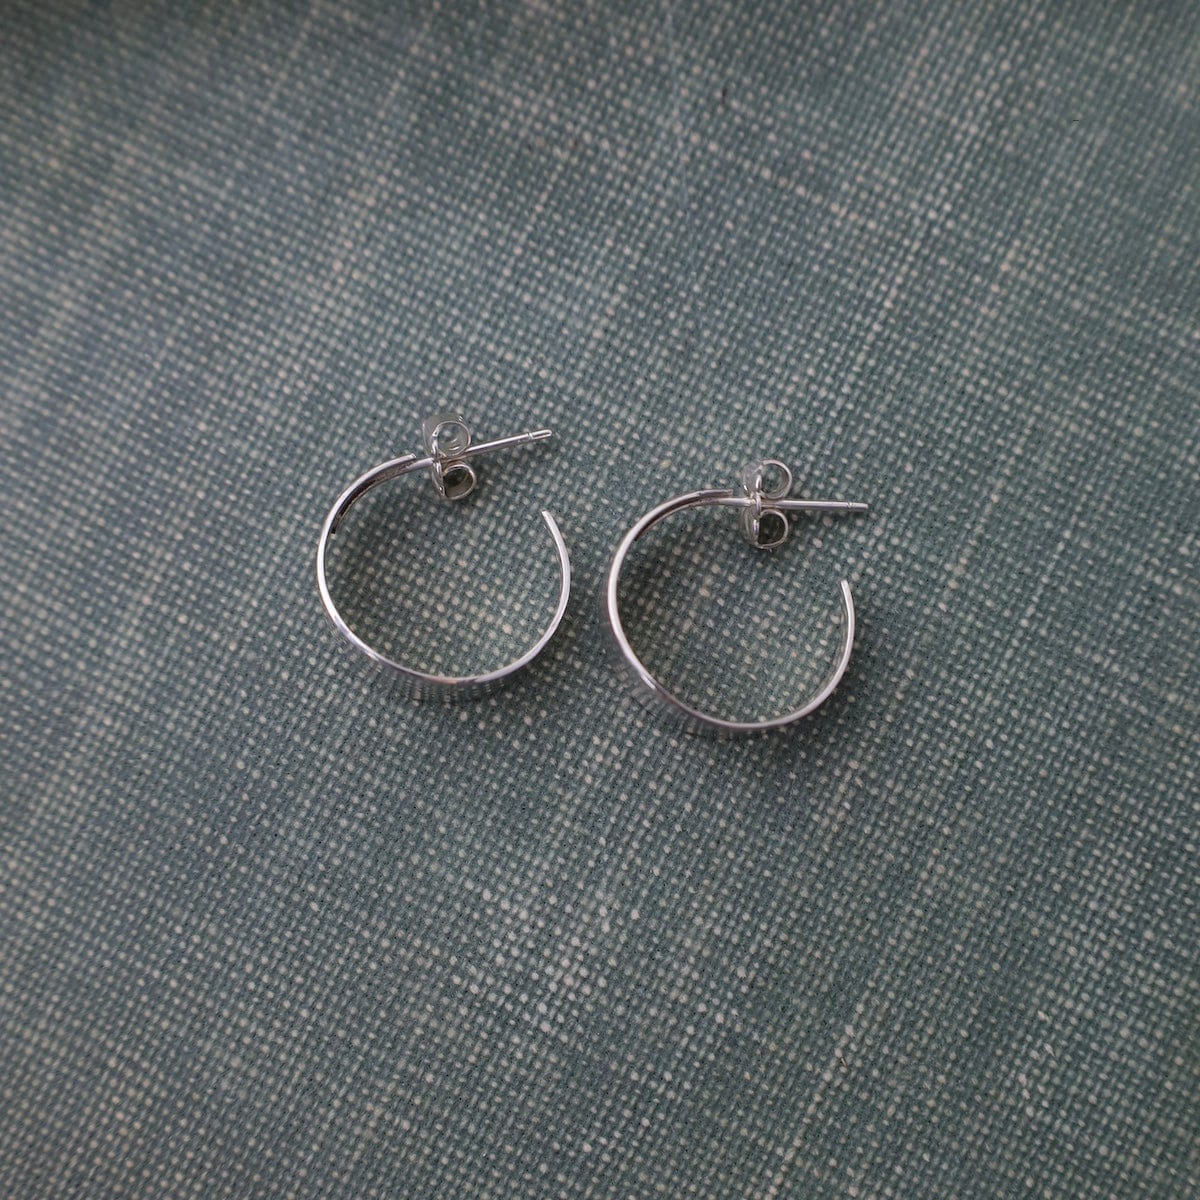 EAR Extra Small Wedge Hoops